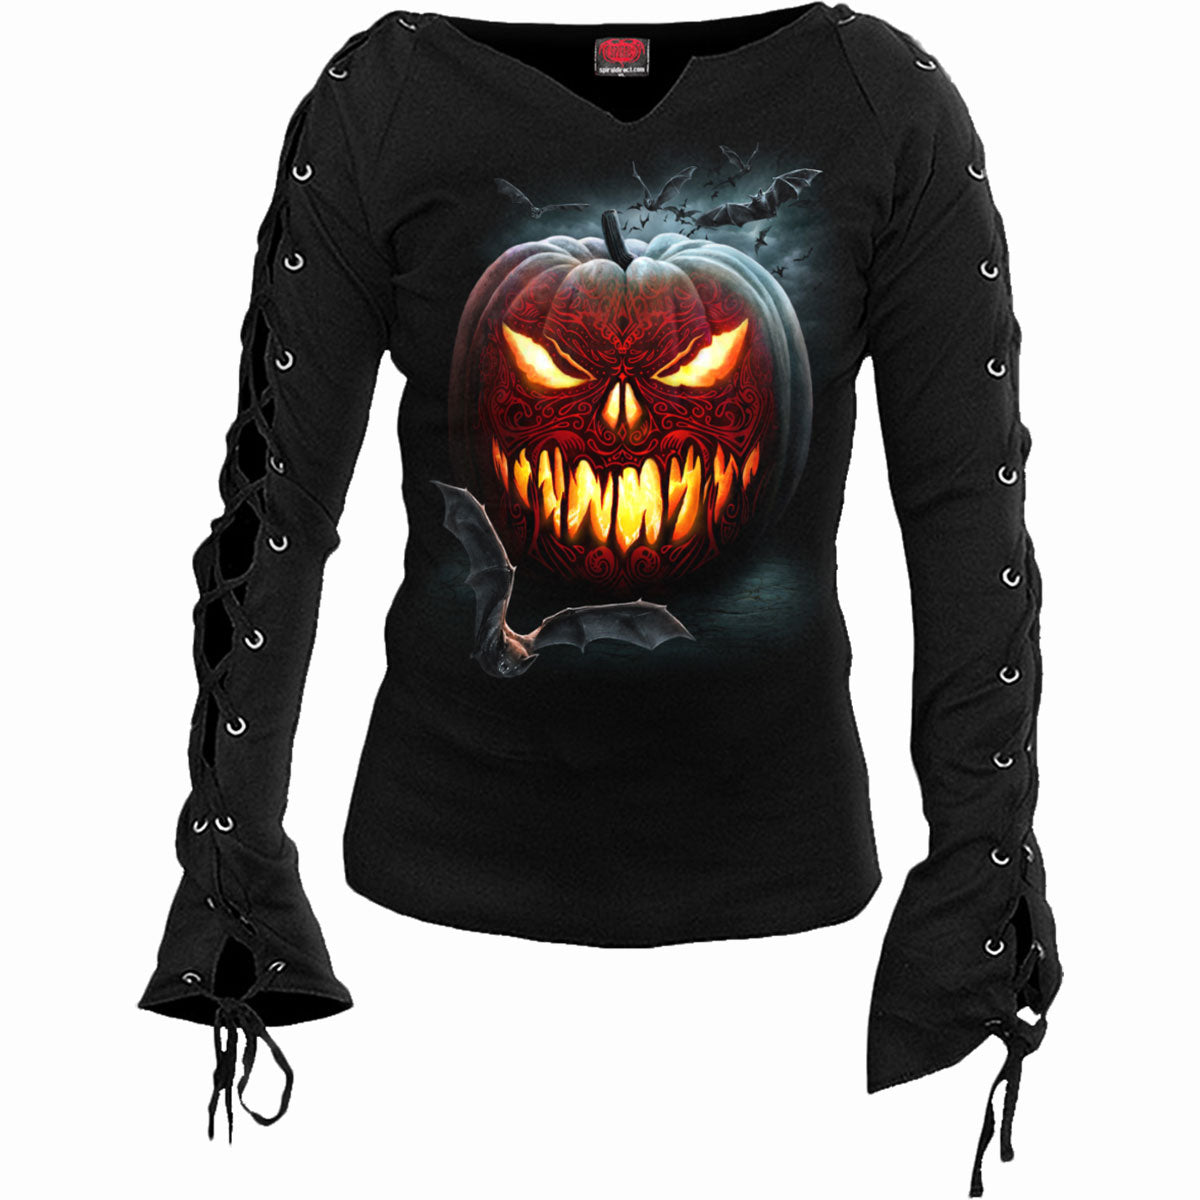 CARVING DEATH - Laceup Sleeve Top Black